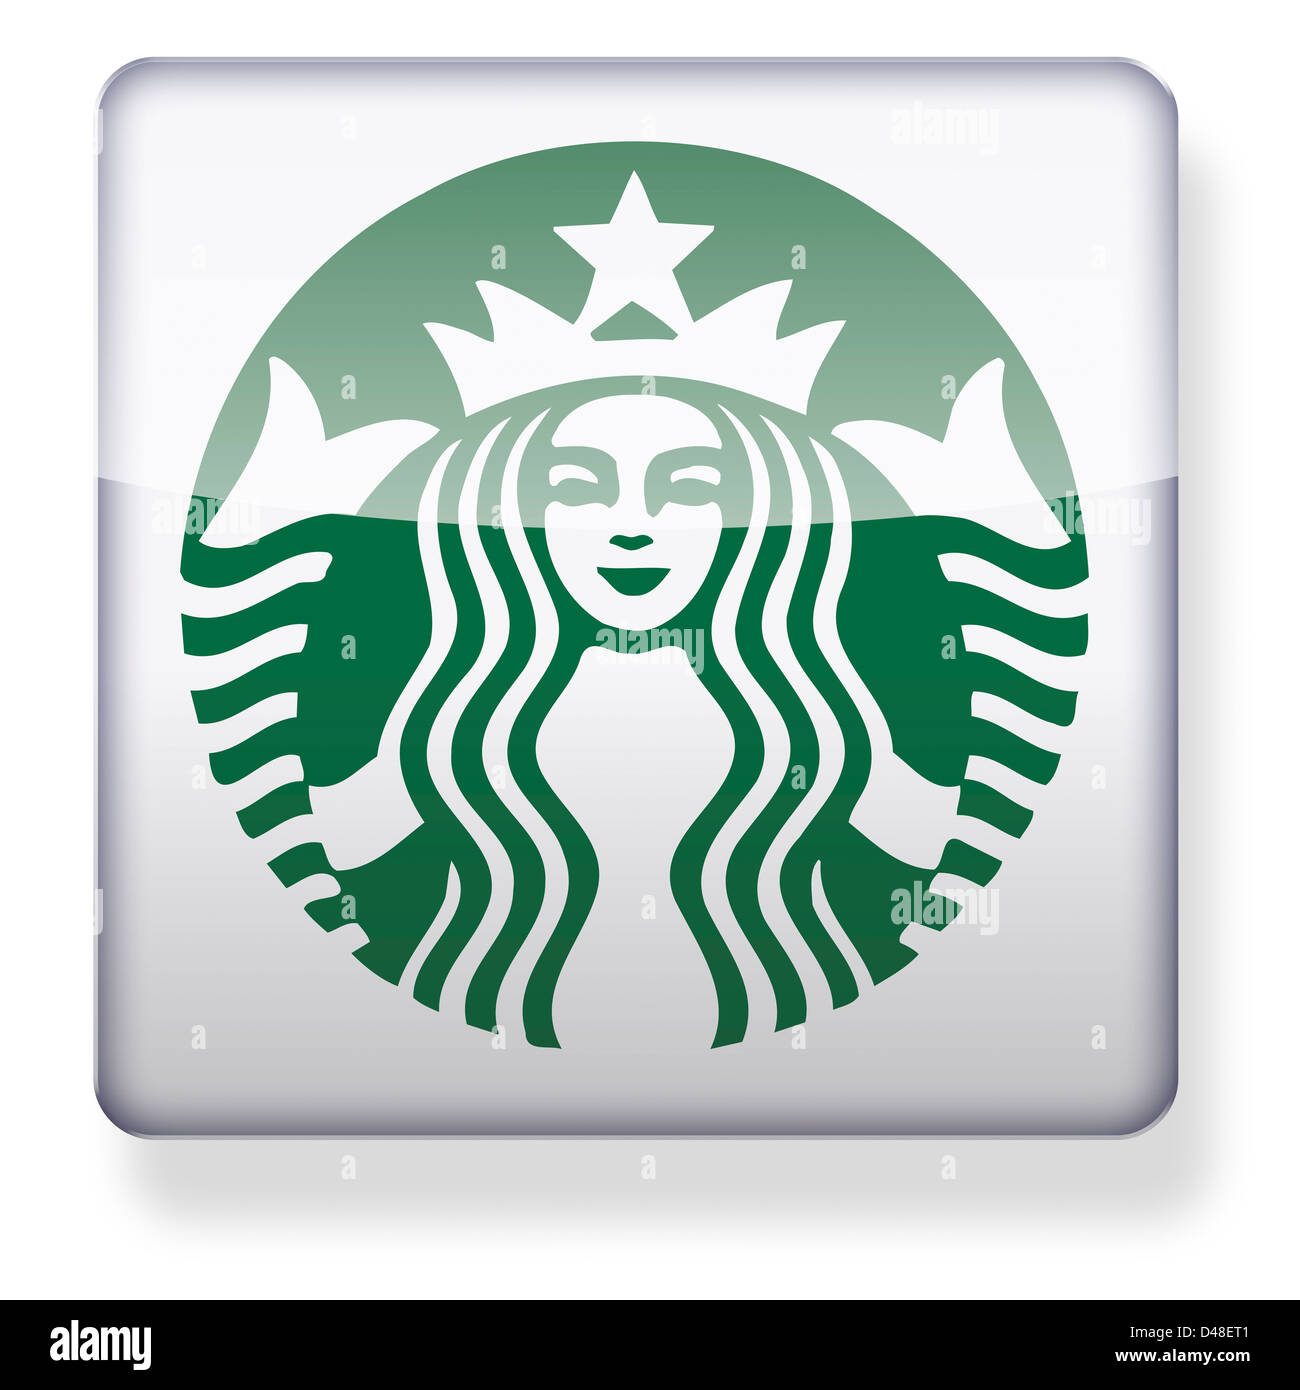 Starbucks logo as an app icon. Clipping path included Stock Photo ...